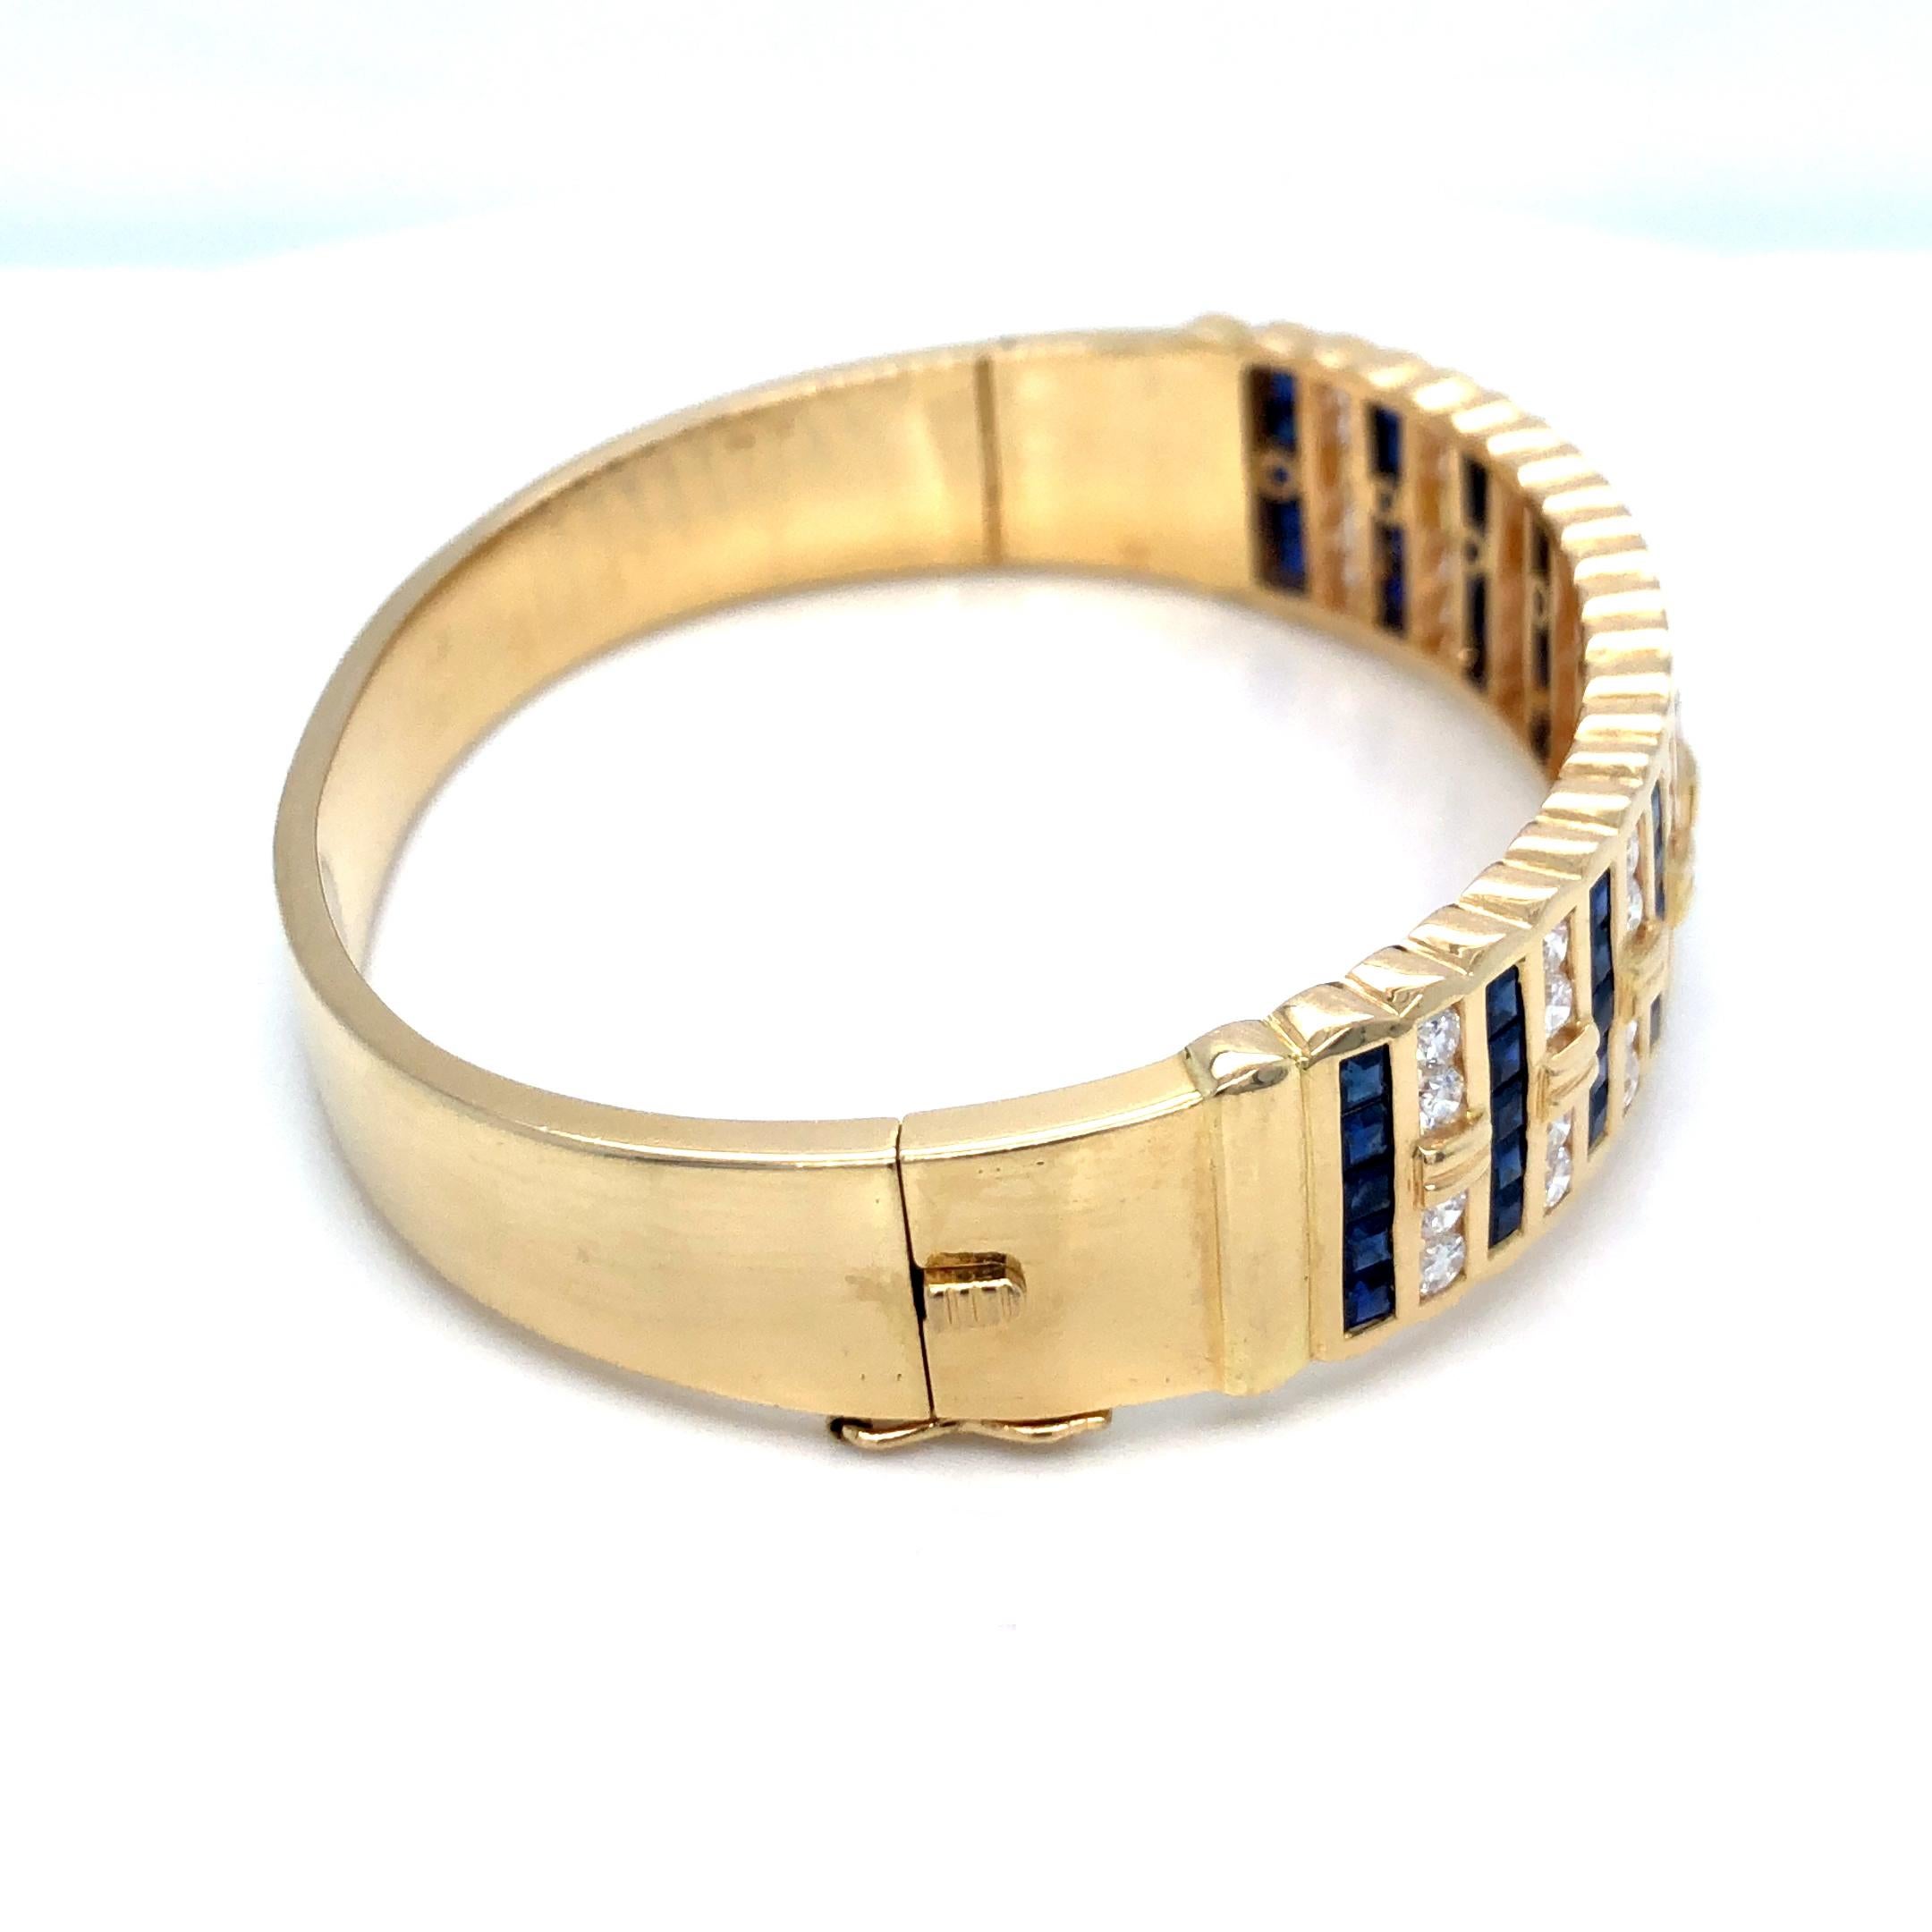 Wide Sapphire & Diamond Bangle Bracelet 18K Yellow Gold In Good Condition For Sale In Dallas, TX